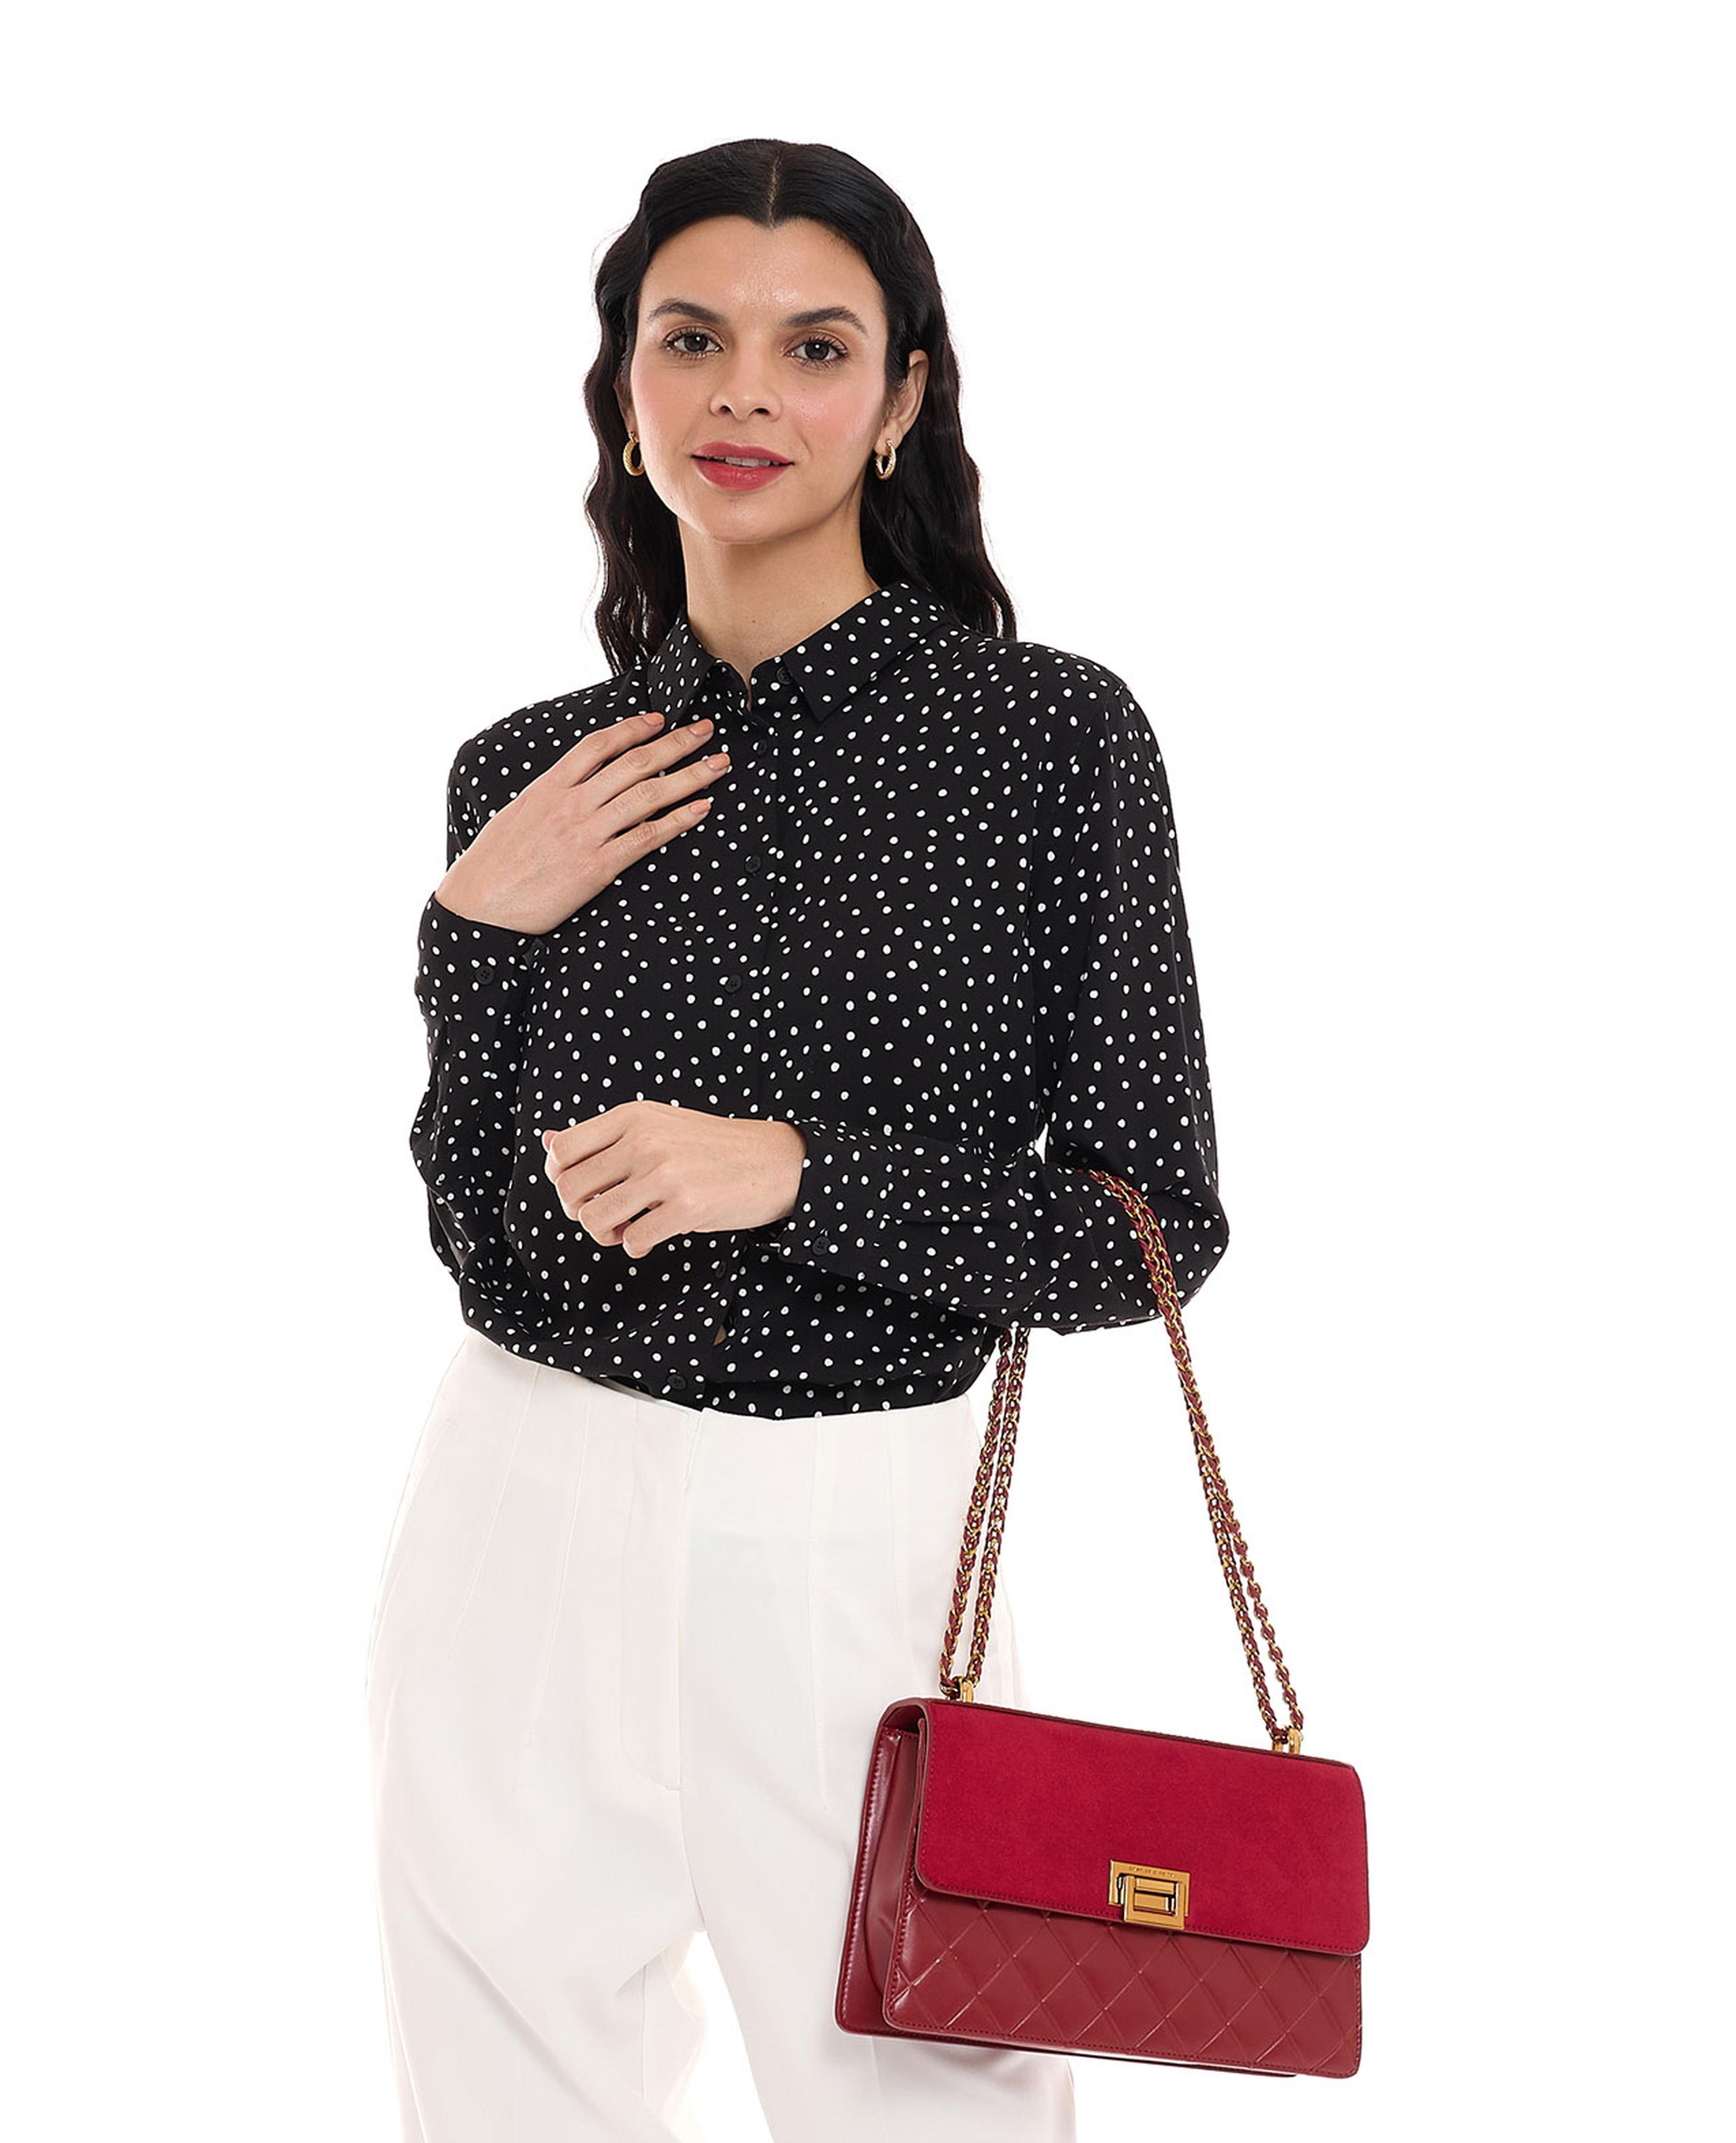 Polka Dots Shirt with Classic Collar and Long Sleeves